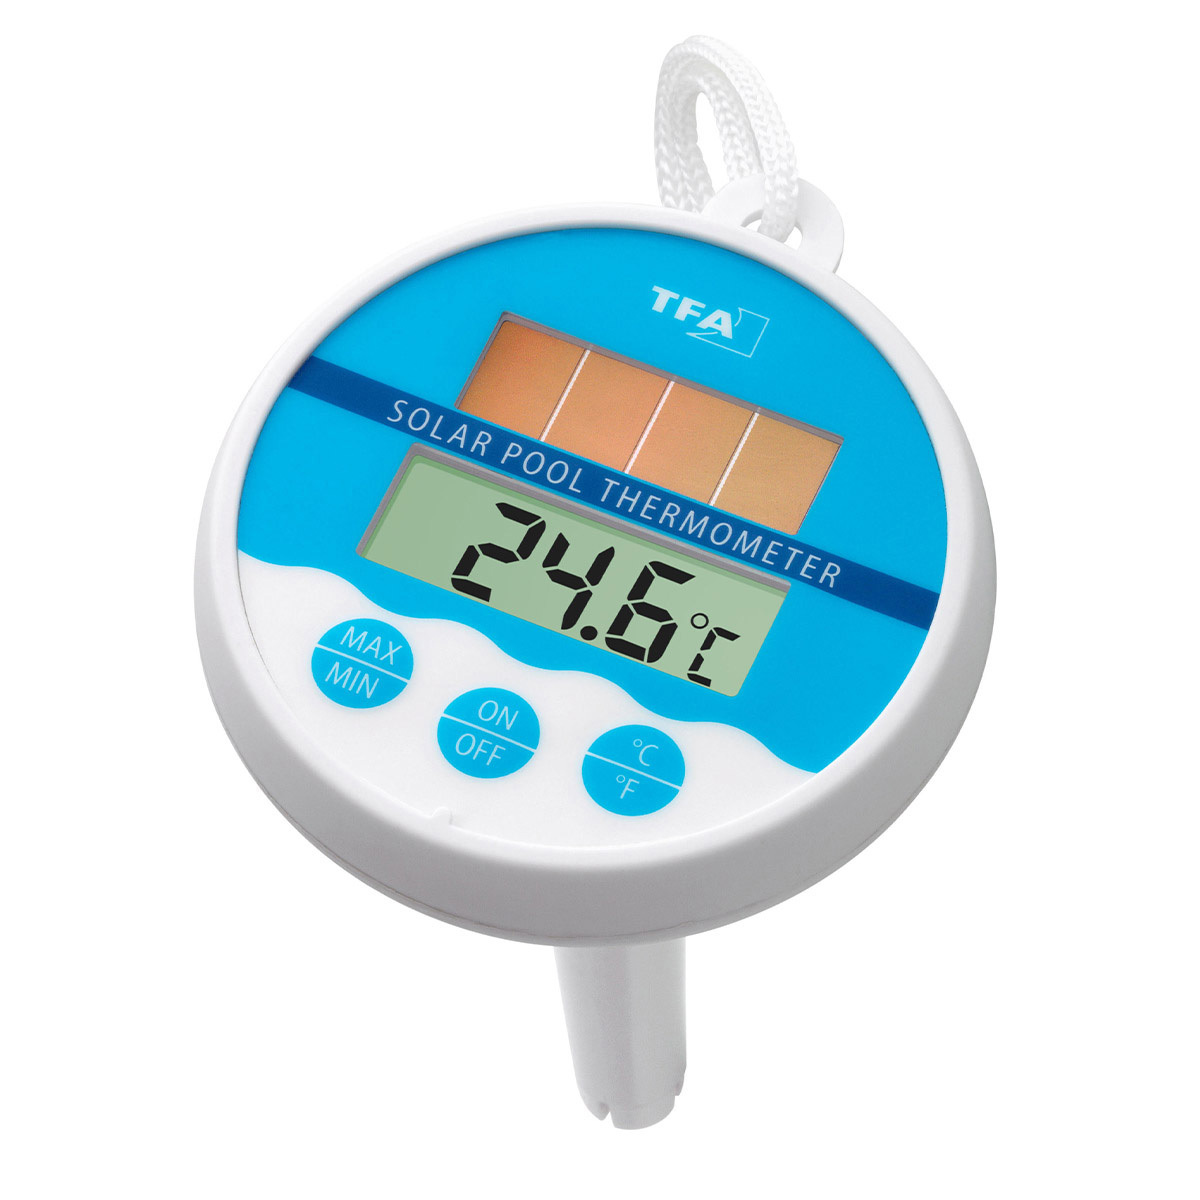 30-1041-digitales-solar-poolthermometer-1200x1200px.jpg